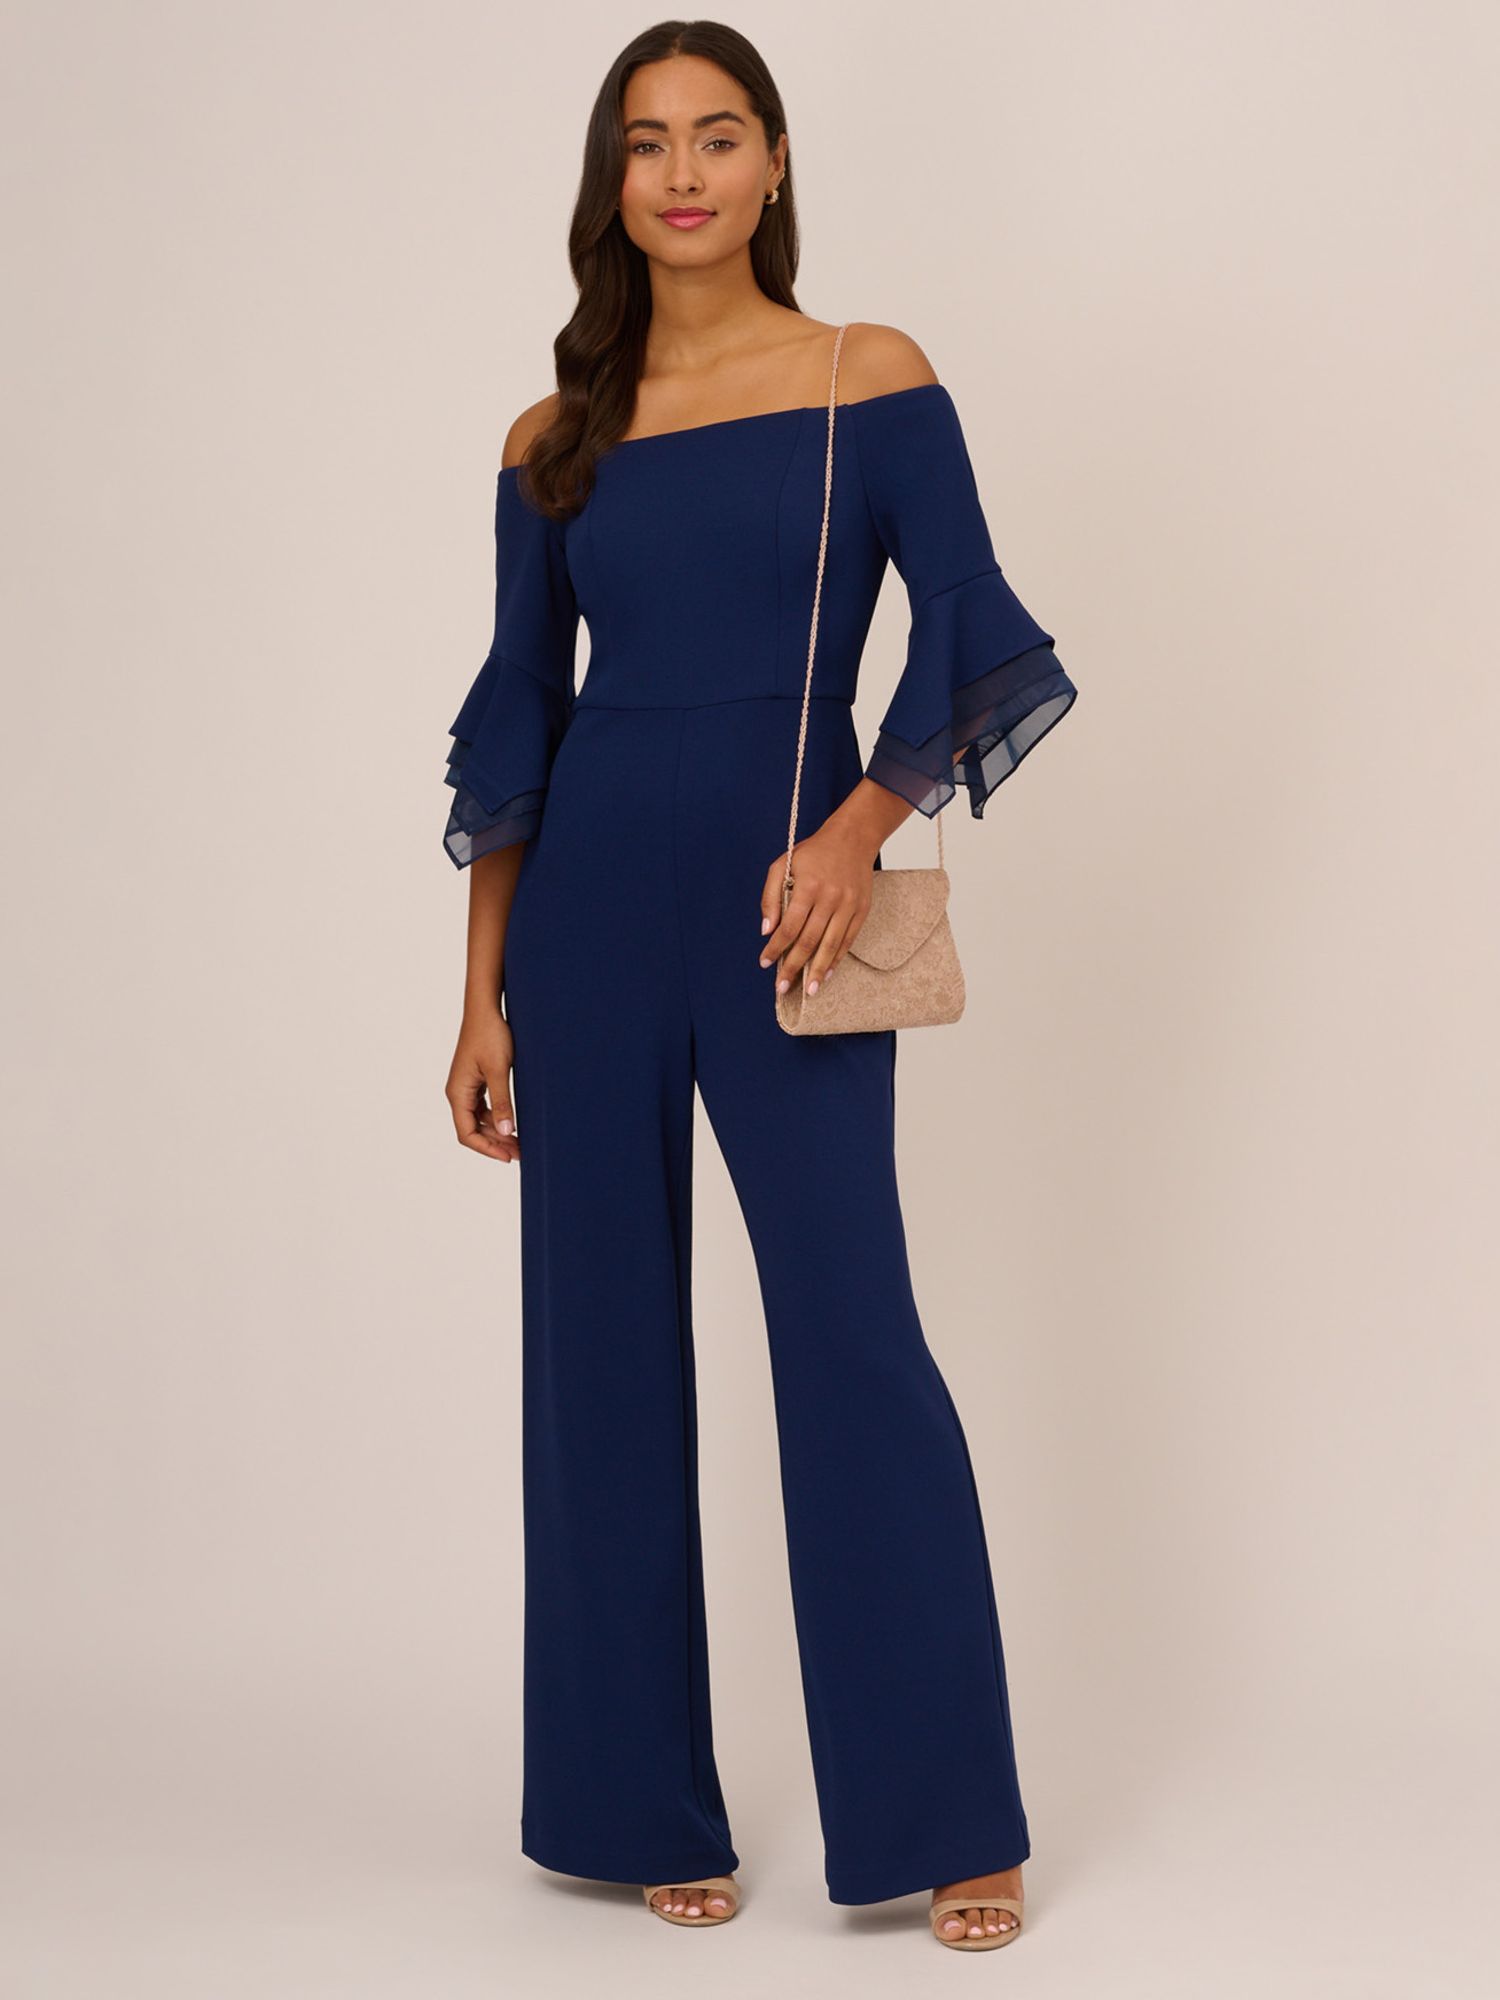 Adrianna Papell Organza Crepe Jumpsuit, Navy at John Lewis & Partners